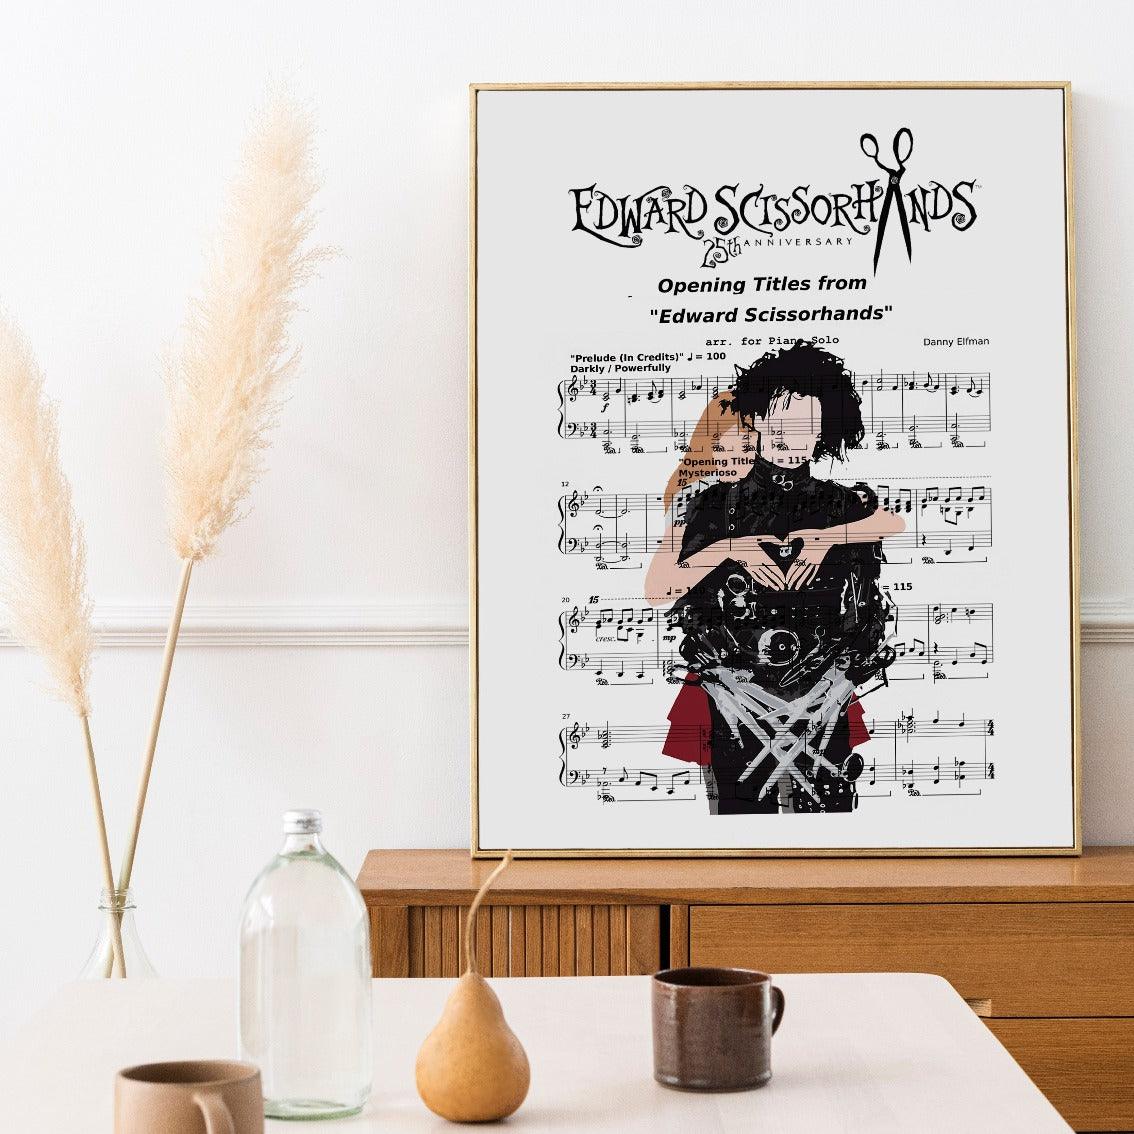 Take your favorite movie with you everywhere. Celebrate the nostalgia of Edward Scissorhands with this elegant Main Theme Poster. Our hand-crafted posters are designed to take you back to those classic films. This poster features the cinematic masterpiece at its finest. Immerse yourself in the unforgettable tune of Edward Scissorhands' Main Theme and be inspired by its beautiful lyrics. Adorn your living space and wall art with this stunning piece and let it be a reminder of the classic films we all adore.